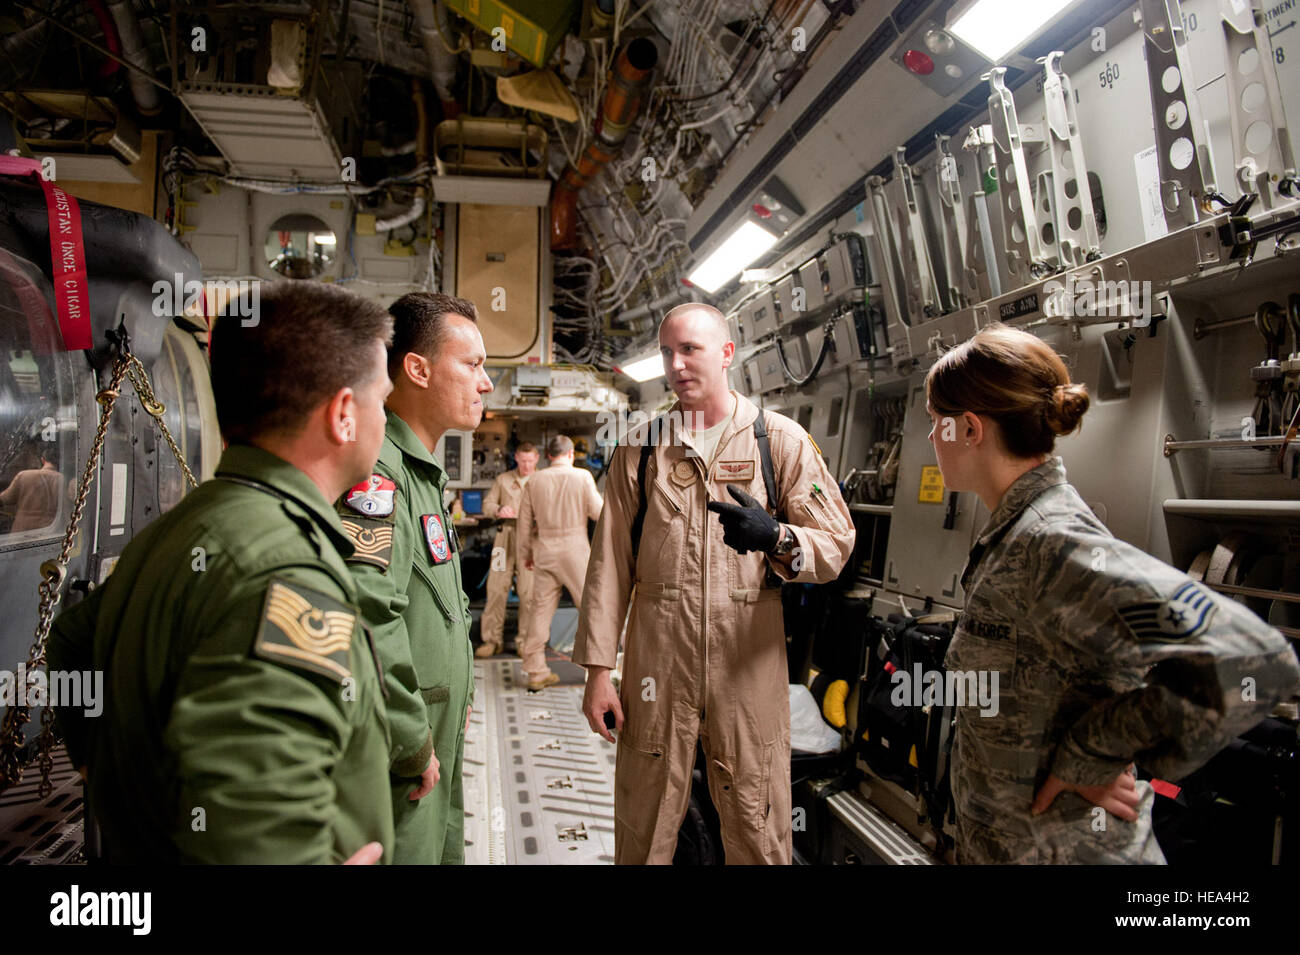 Staff Sgt. Micah Hackett, 6th Airlift Squadron loadmaster, second from right, gives a safety briefing to two Turkish air force UH-60 Black Hawk helicopter pilots, left, and Staff Sgt. Lana Mills, 39th Air Base Wing Public Affairs broadcaster, right, on a C-17 Globemaster III May 3, 2012, at Incirlik Air Base, Turkey. The C-17 aircrew from Joint Base McGuire-Dix-Lakehurst, N.J., transported a Turkish air force helicopter to Kabul, Afghanistan, May 5, 2012. The joint support mission provided smooth delivery of the helicopter to replace one that crashed December 2011. Stock Photo